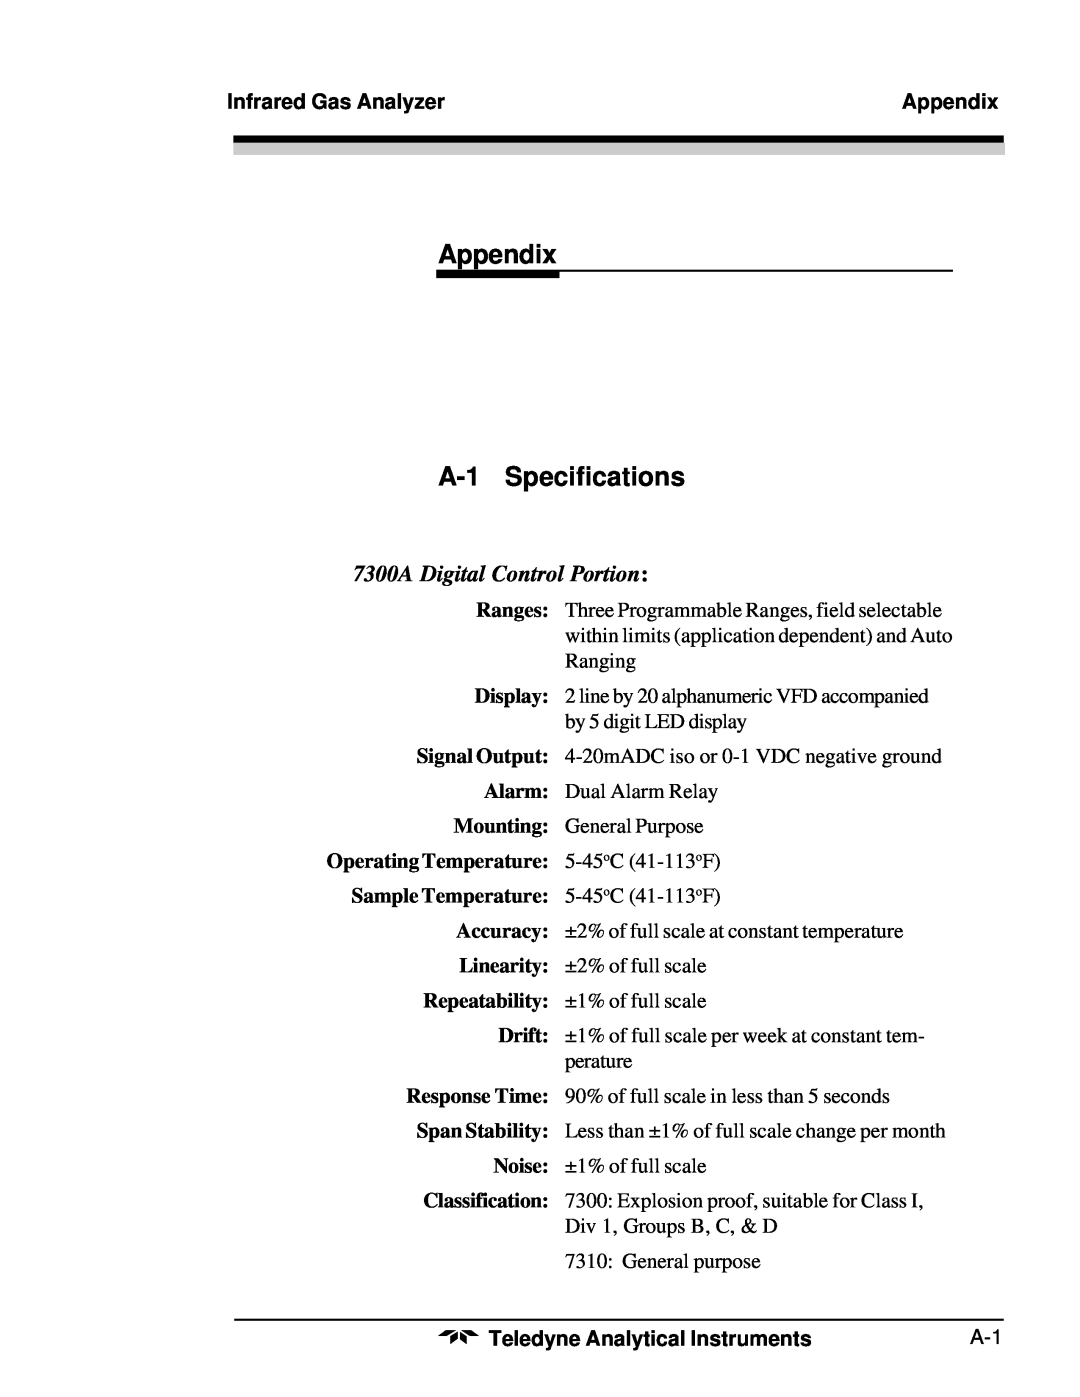 Teledyne manual Appendix A-1Specifications, 7300A Digital Control Portion, Infrared Gas Analyzer 